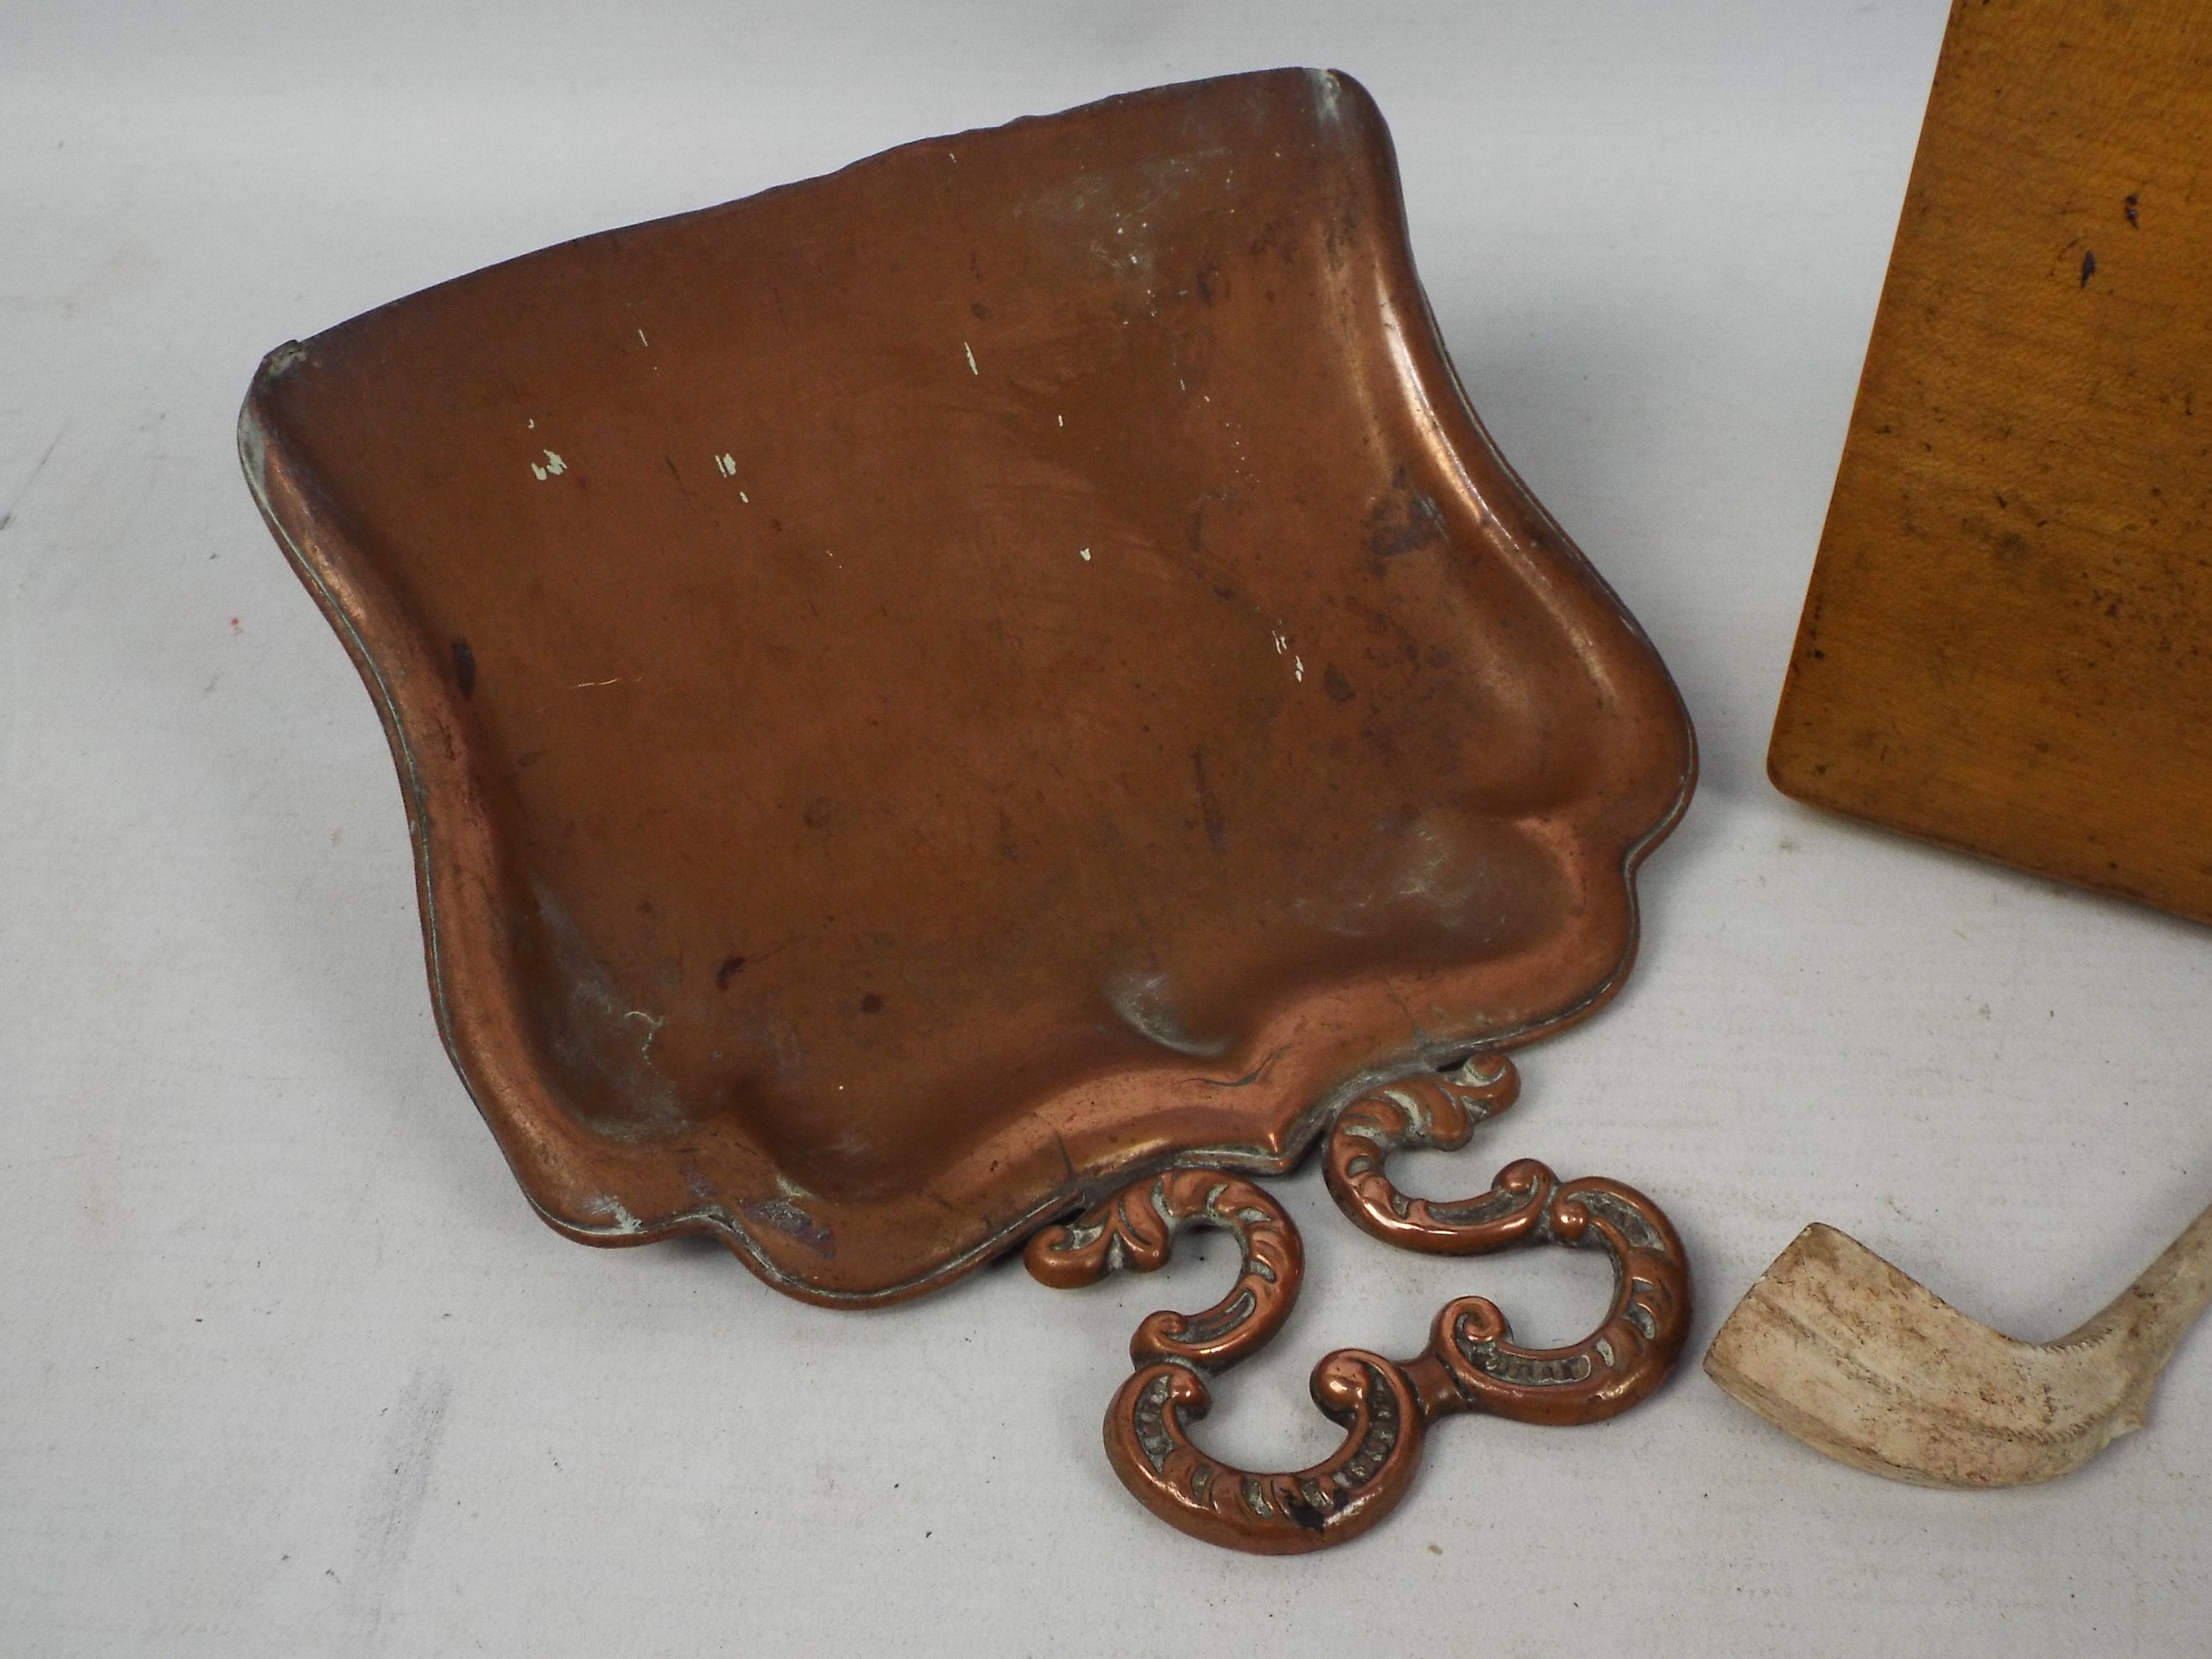 A Mauchline ware box depicting views of Harrogate an Art Nouveau style copper crumb tray, - Image 2 of 5